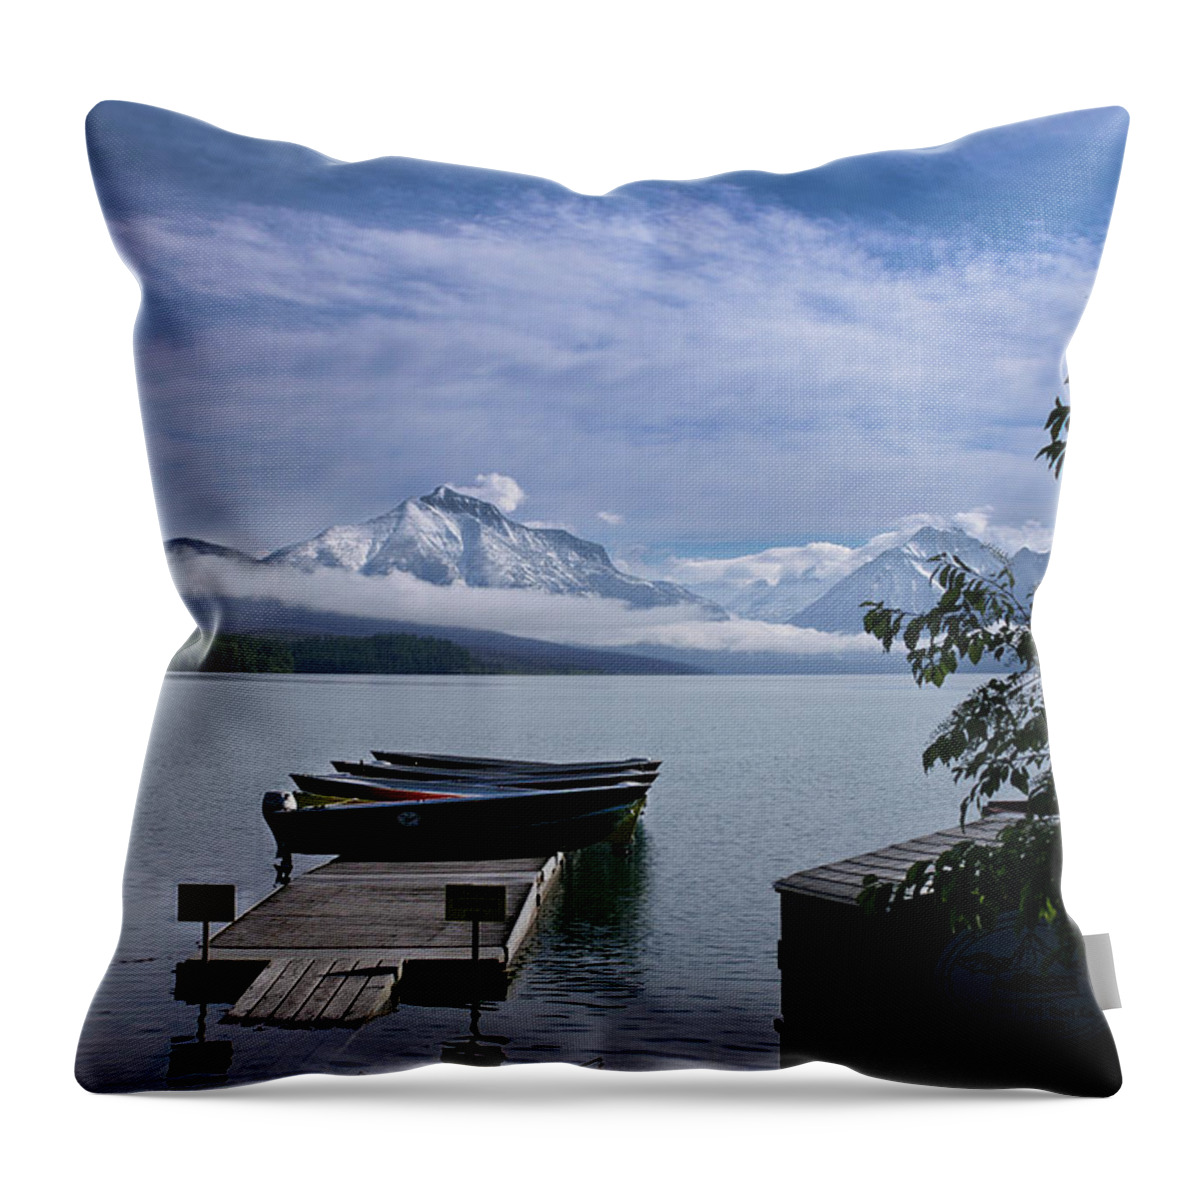 Glacier National Park Throw Pillow featuring the photograph Glacier Lake Dock by Linda Steele